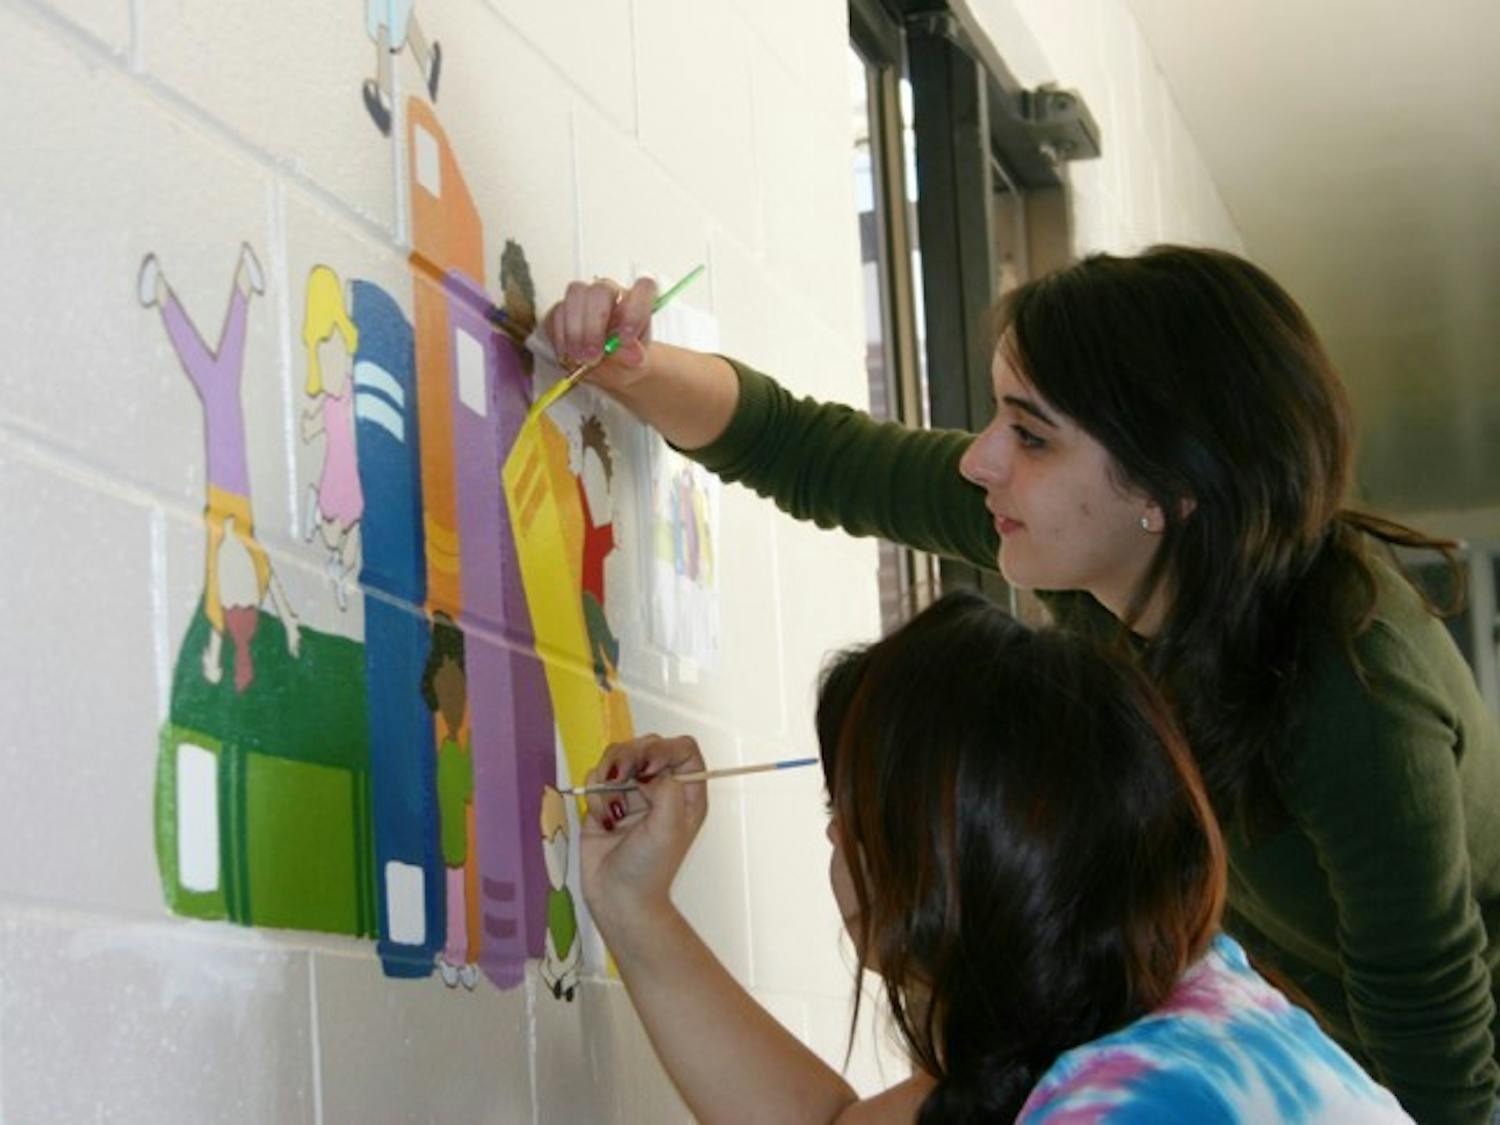 Lesly Parra, an 18-year-old advertising freshman, and Sasha Saigol, a 19-year-old marketing freshman, perfect a mural in a Chester Shell Elementary School hallway Saturday. They volunteered their time as a part of Project Makeover, an organization that fixes up one Alachua County school each year.